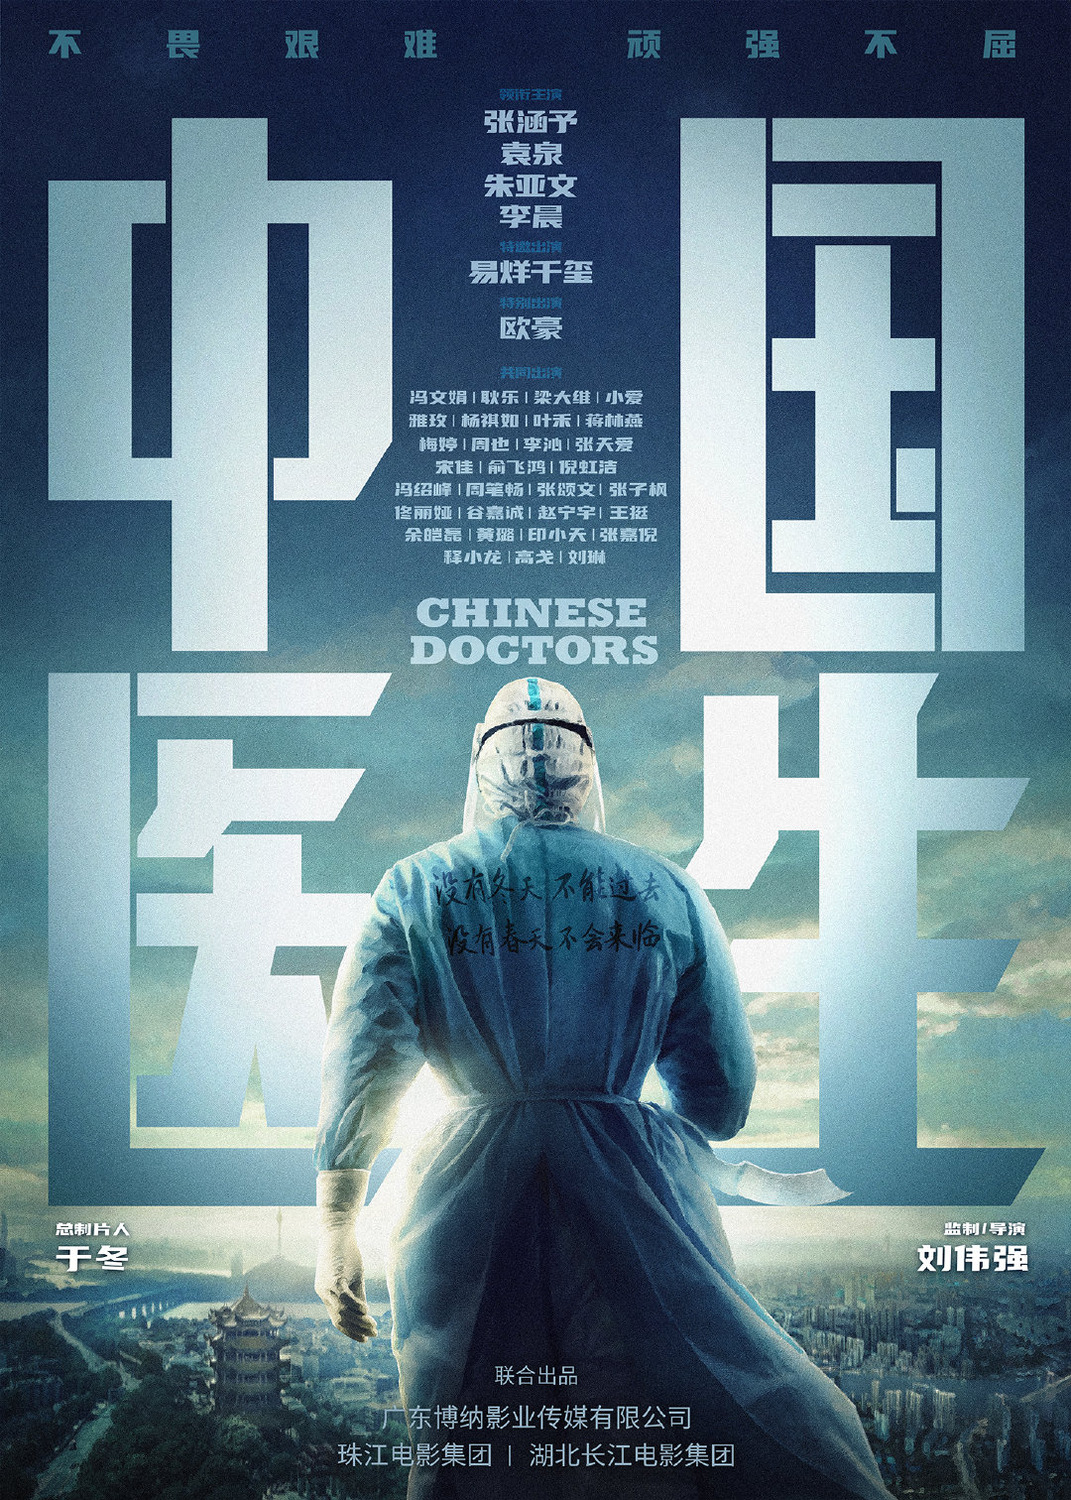 Extra Large Movie Poster Image for Chinese Doctors (#3 of 4)